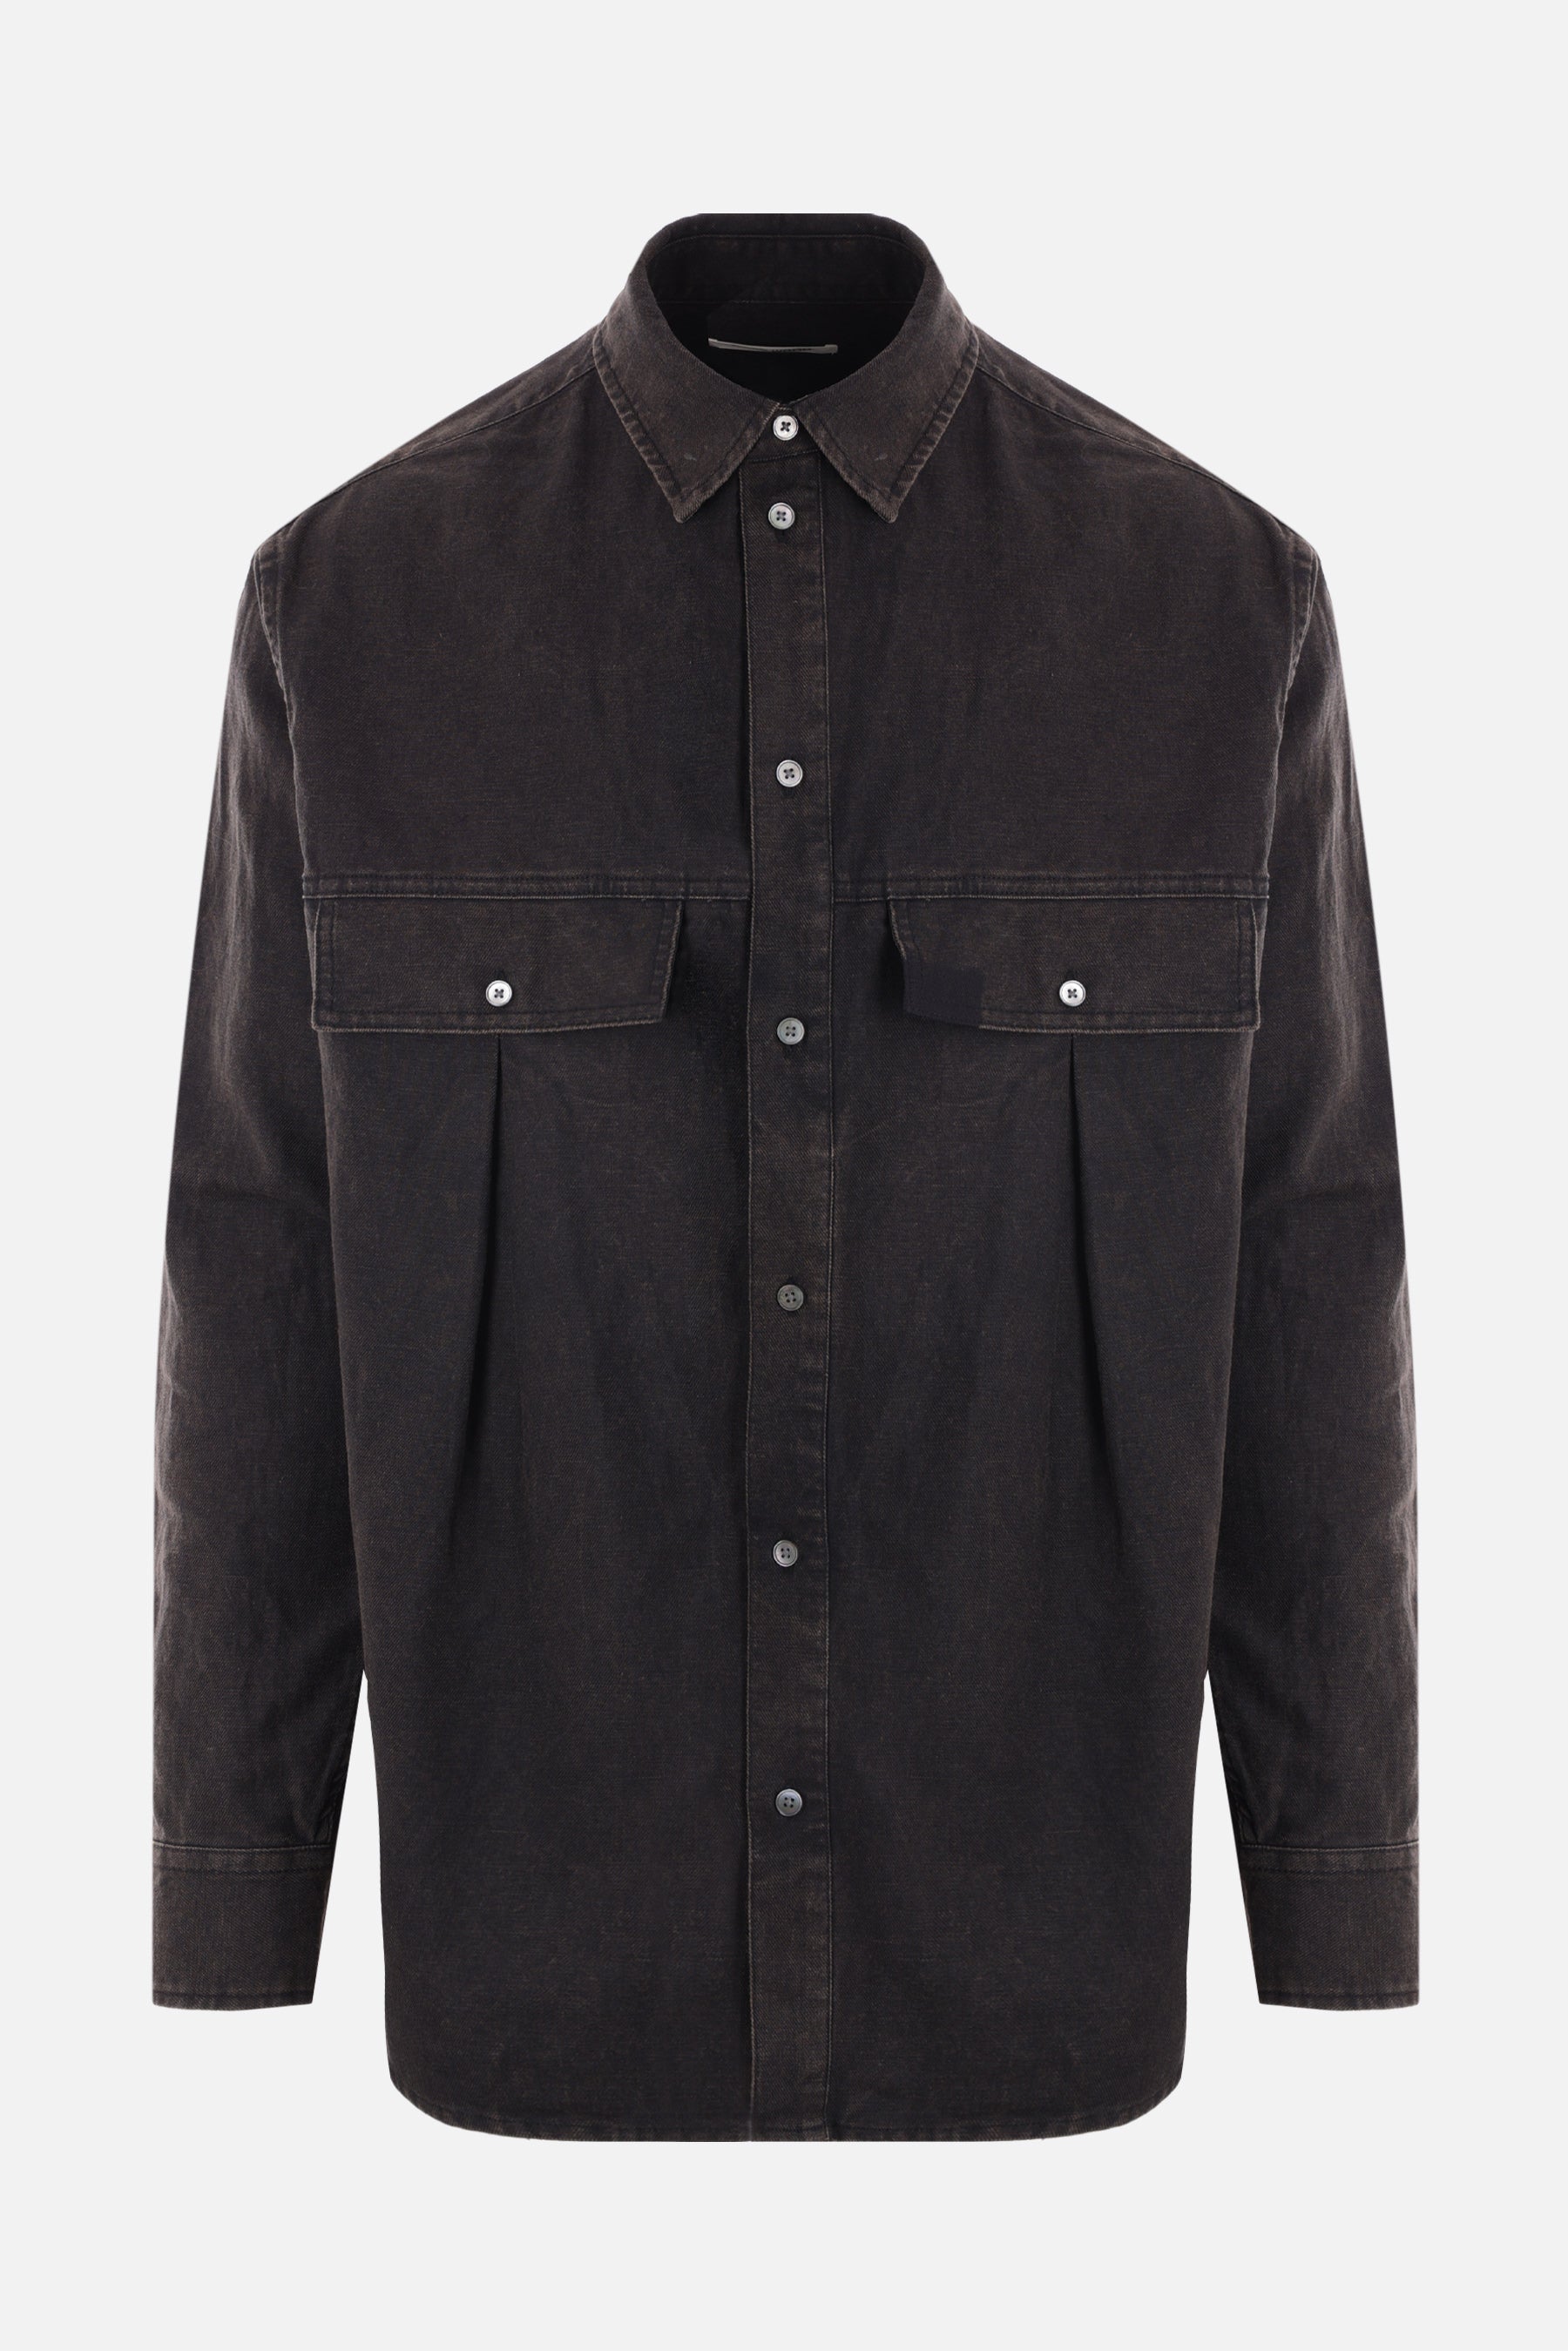 Nico Pleated cotton and linen shirt